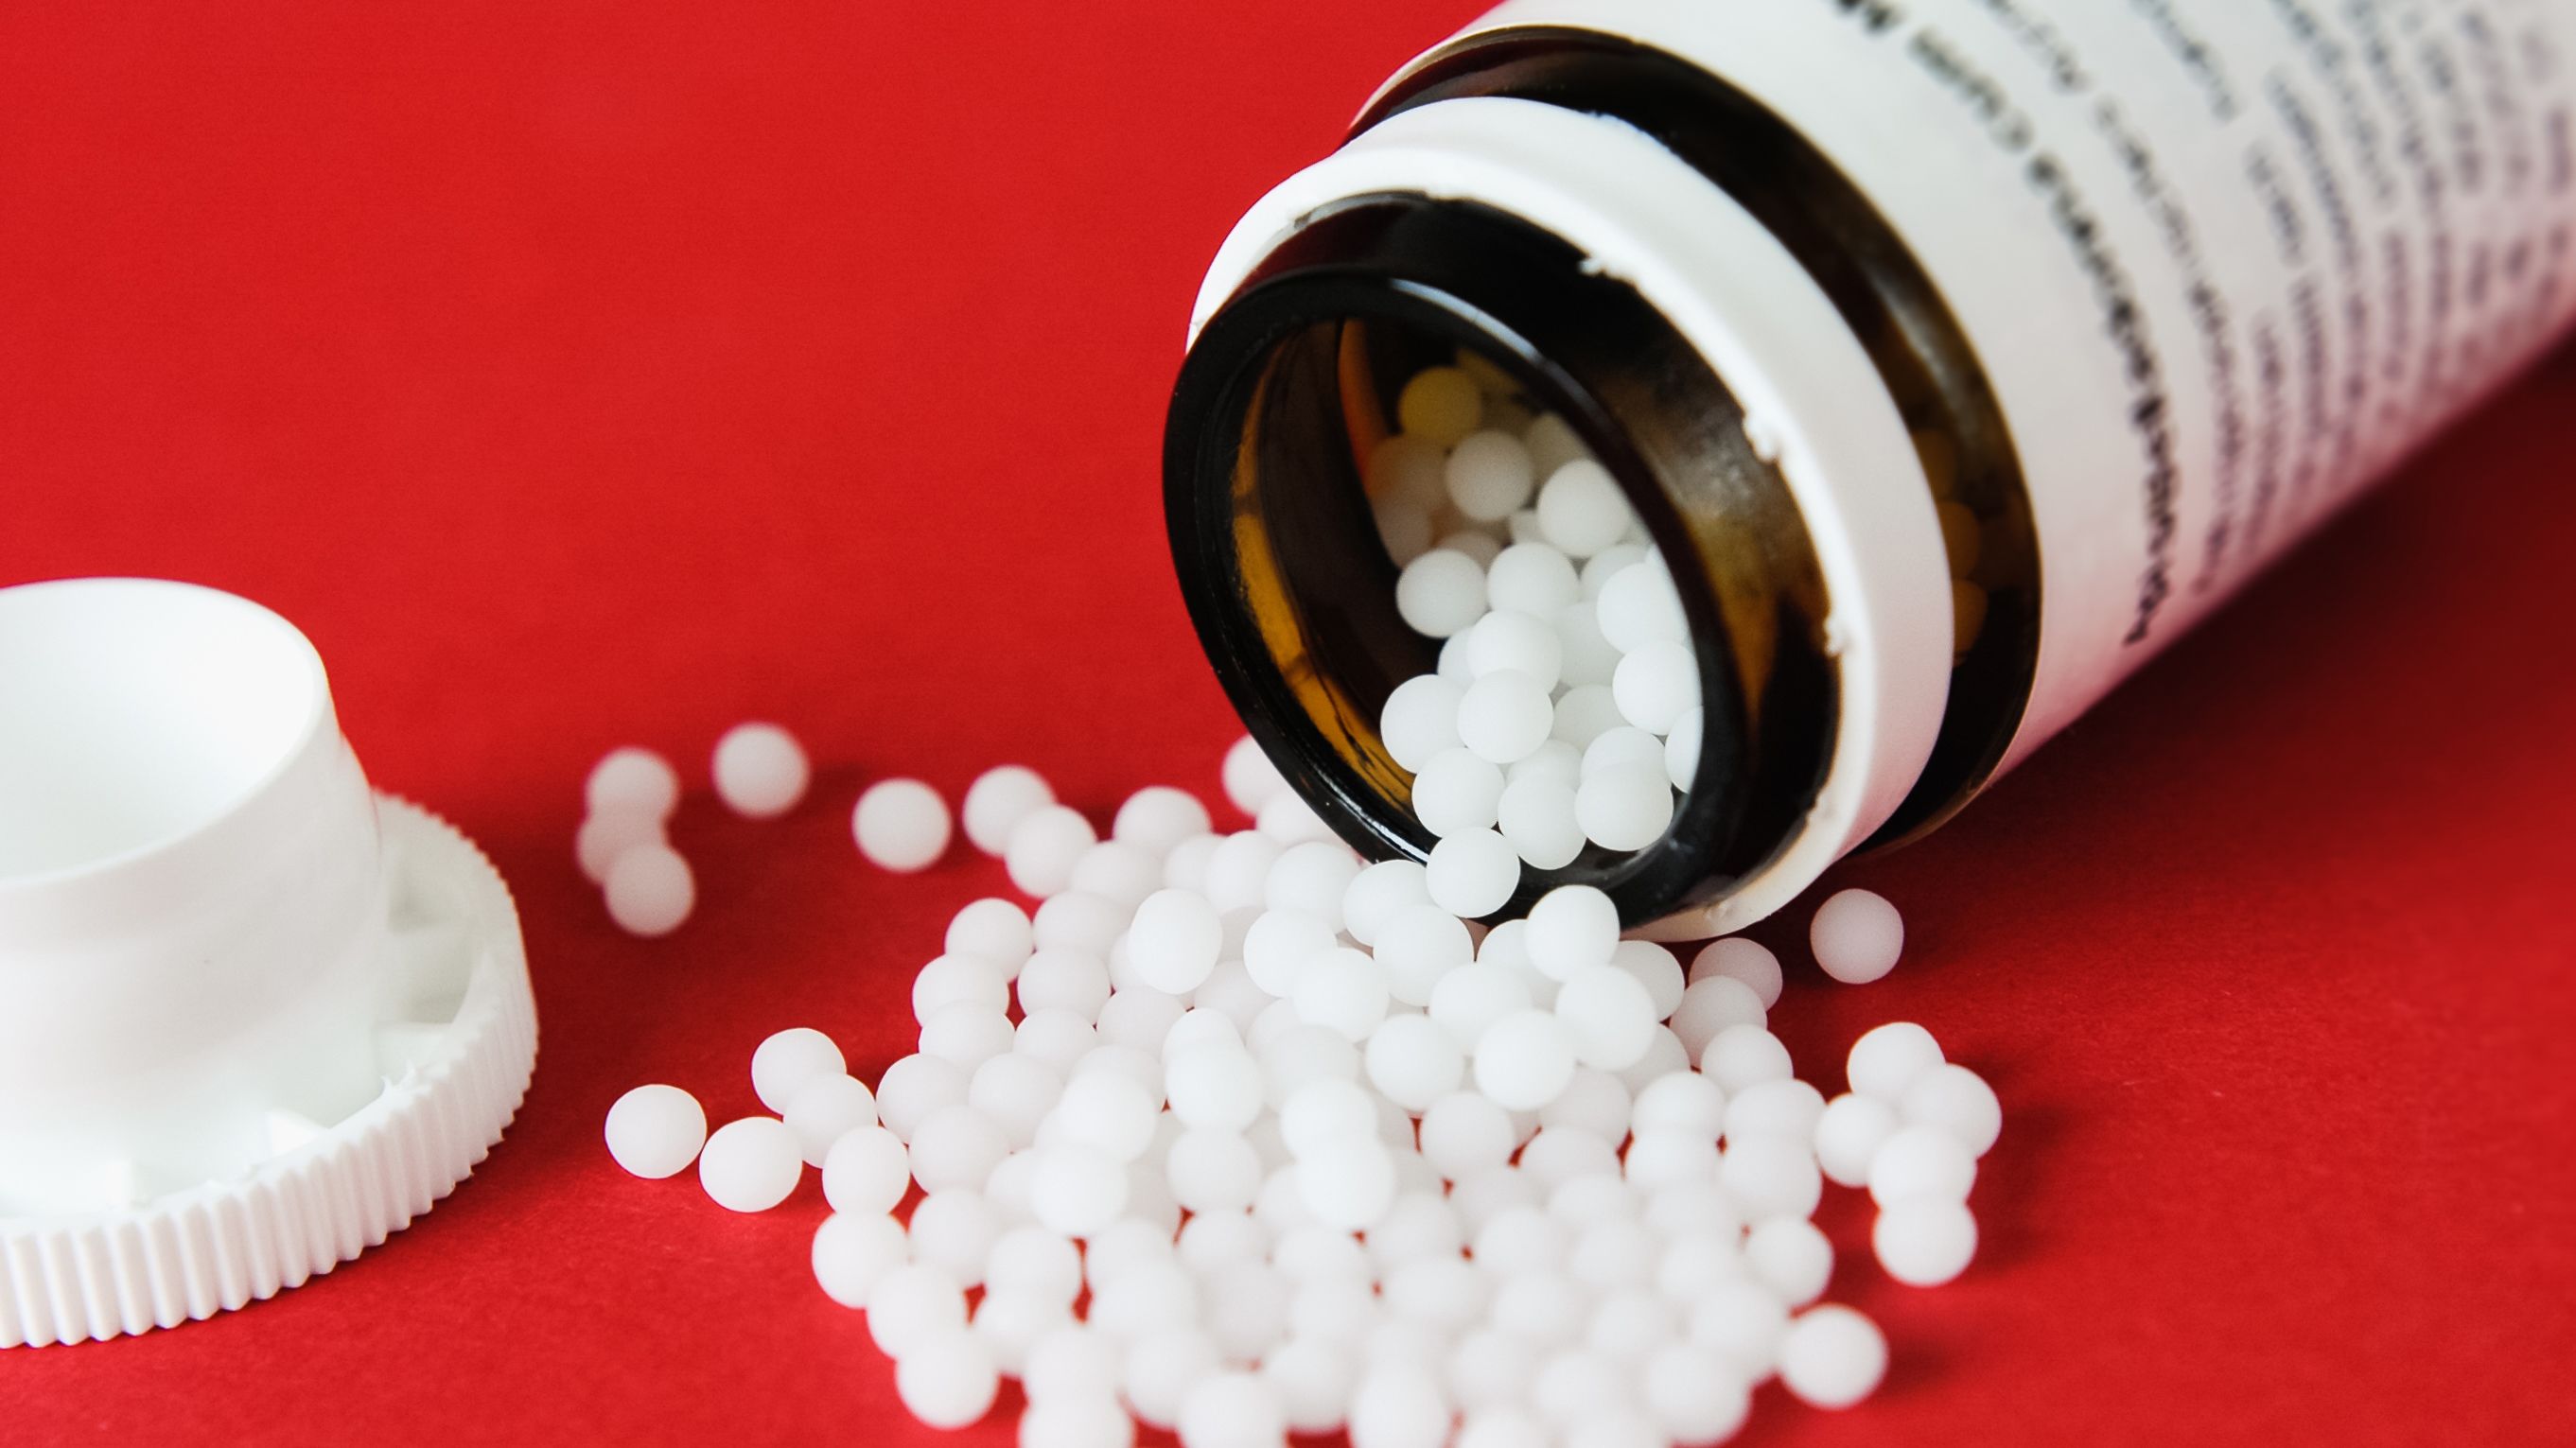 FDA takes on homeopathic drugs with potential safety risks | CNN